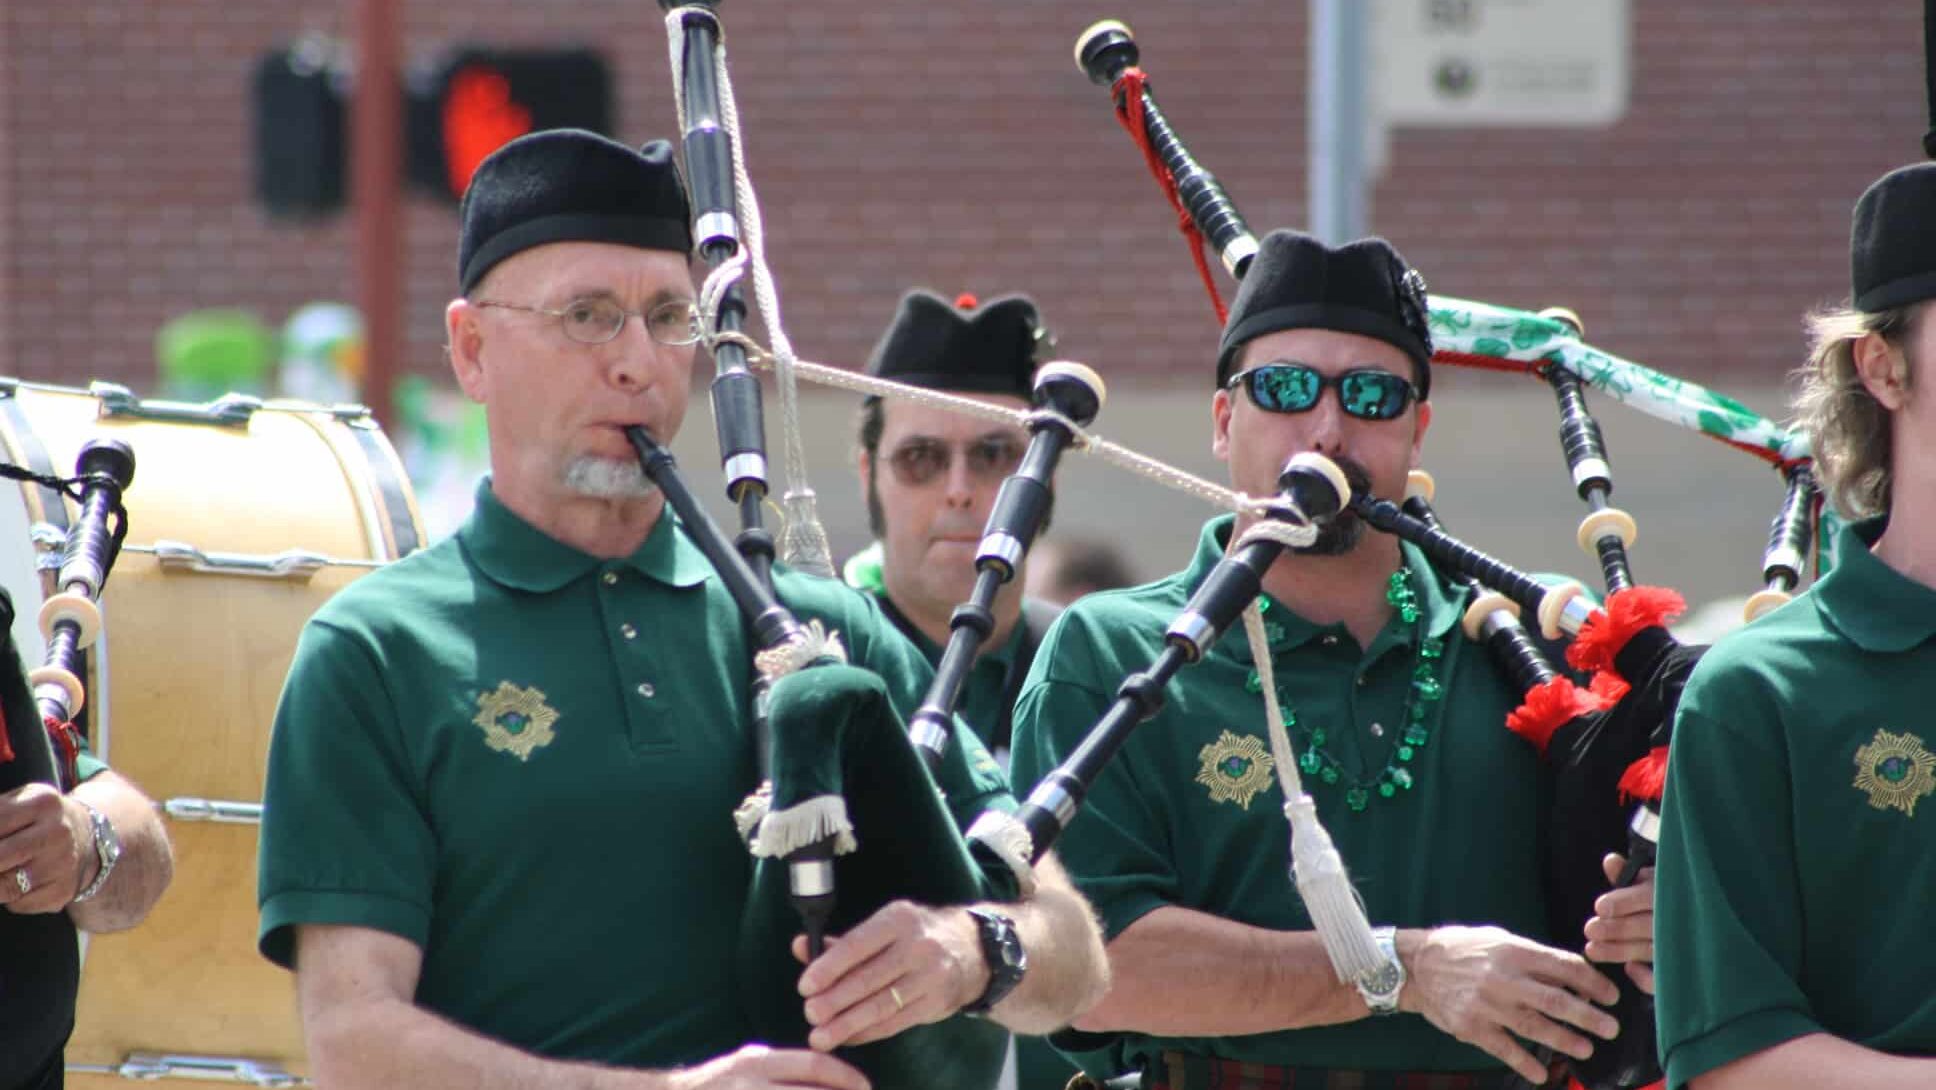 63rd Annual Houston St. Patrick's Parade and Celebration